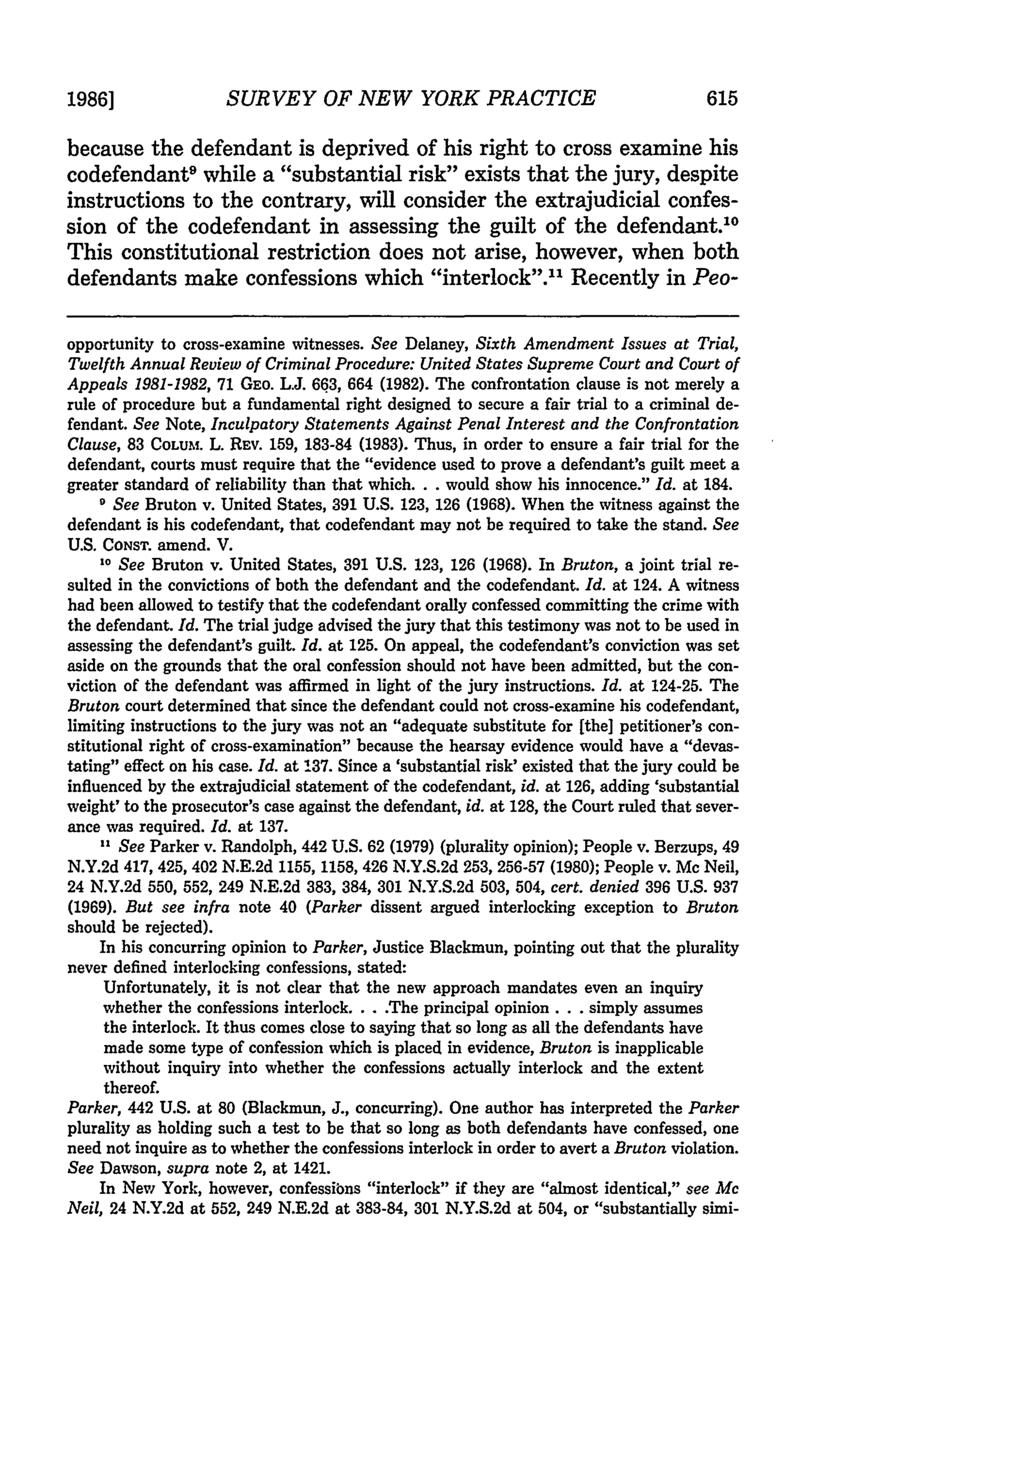 1986] SURVEY OF NEW YORK PRACTICE because the defendant is deprived of his right to cross examine his codefendant 9 while a "substantial risk" exists that the jury, despite instructions to the